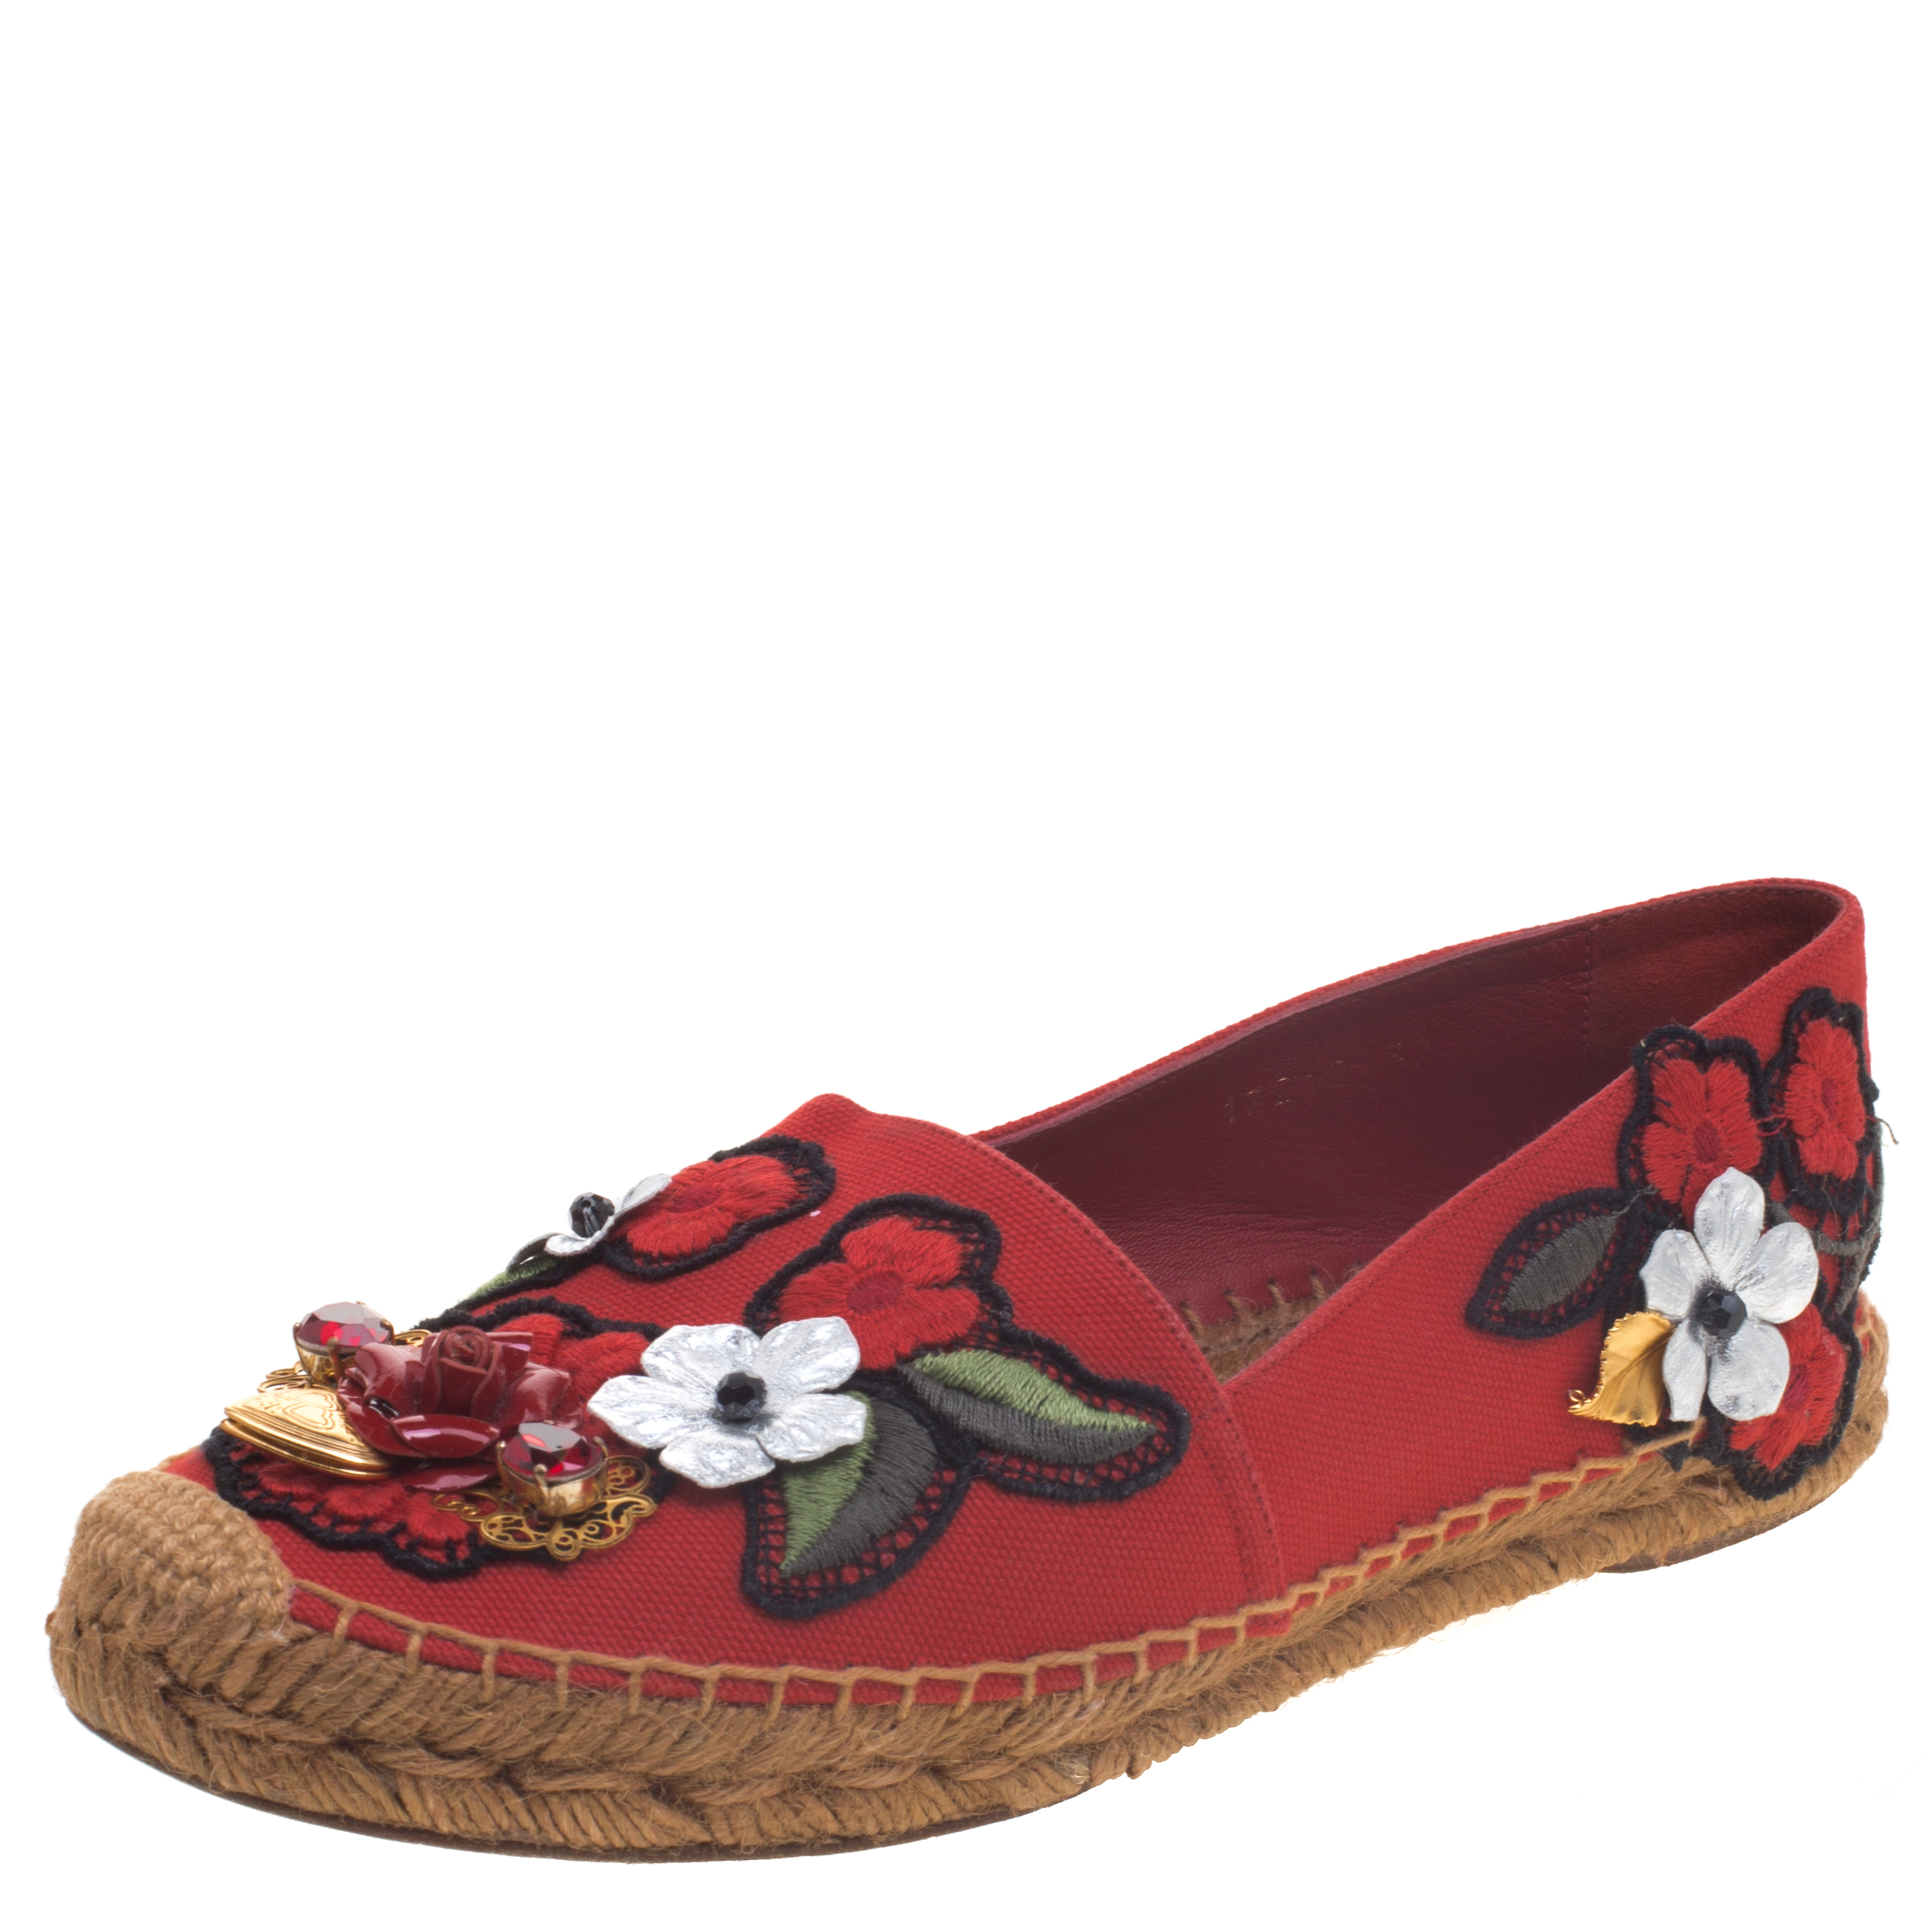 Dolce and Gabbana Red Canvas Locket Flower and Jewel Embroidered Espadrilles Size 37